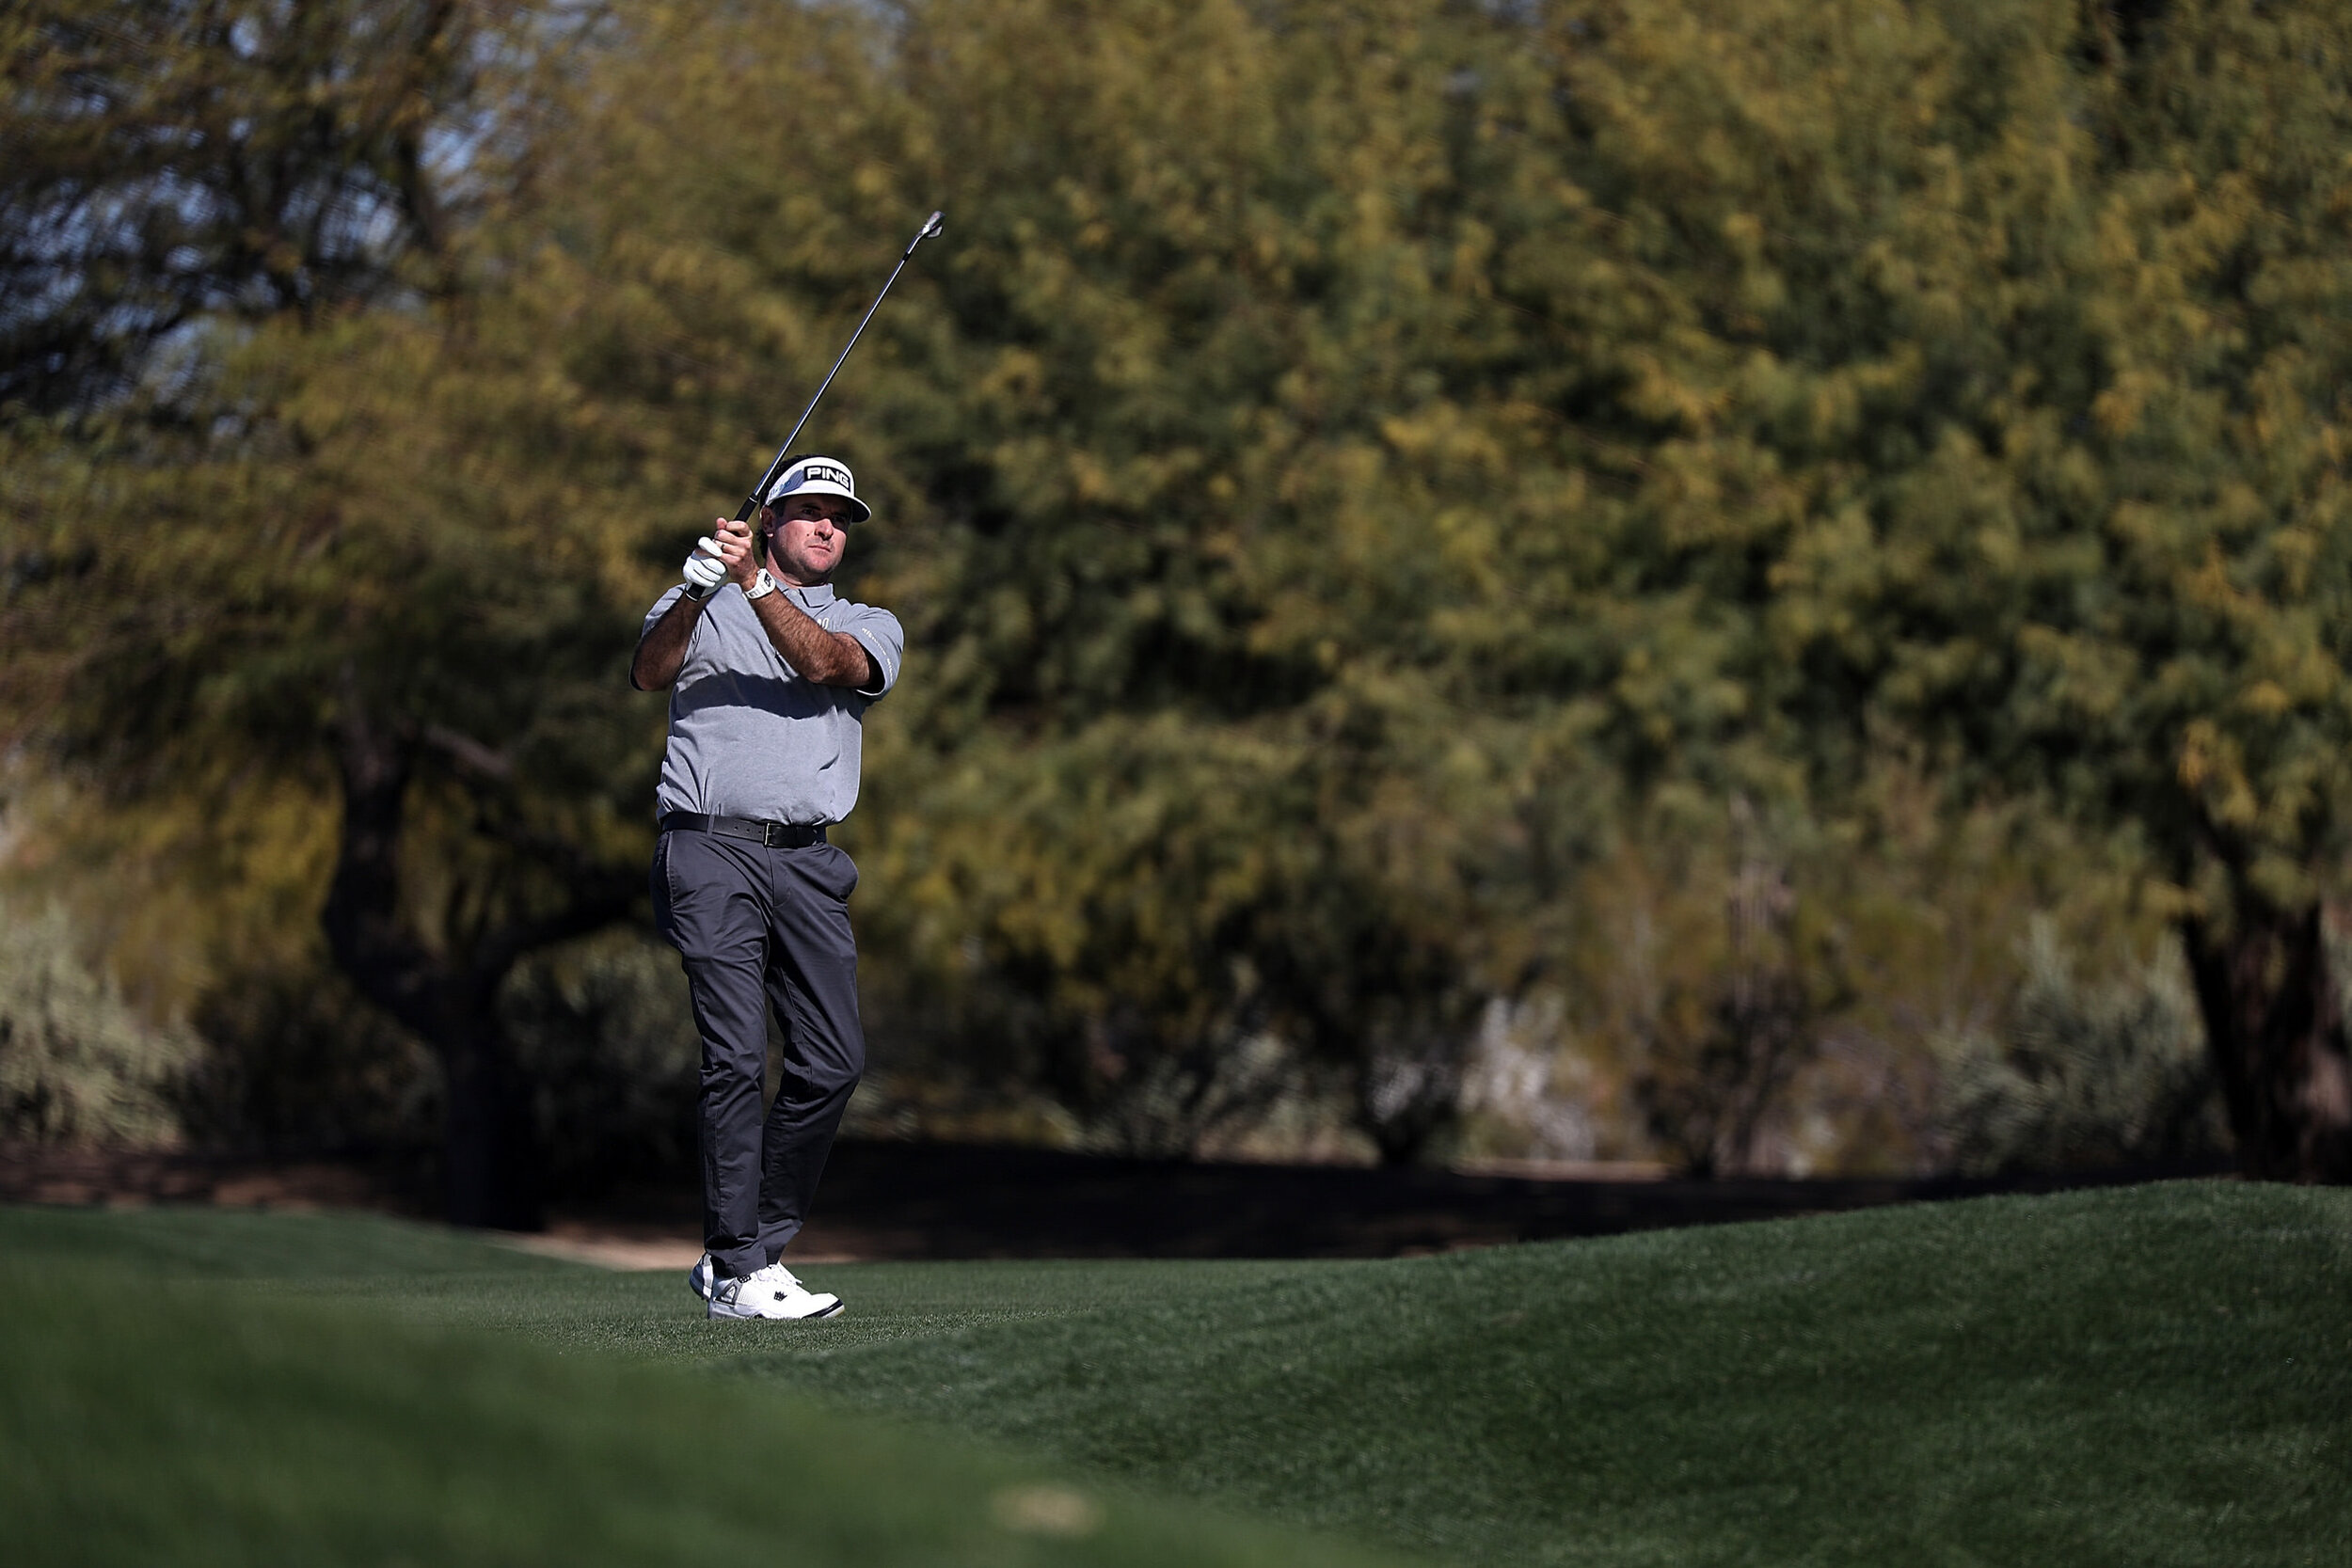  SCOTTSDALE, ARIZONA - FEBRUARY 04: Bubba Watson of the United States hits his second shot on the second hole during the first round of the Waste Management Phoenix Open at TPC Scottsdale on February 04, 2021 in Scottsdale, Arizona. (Photo by Christi